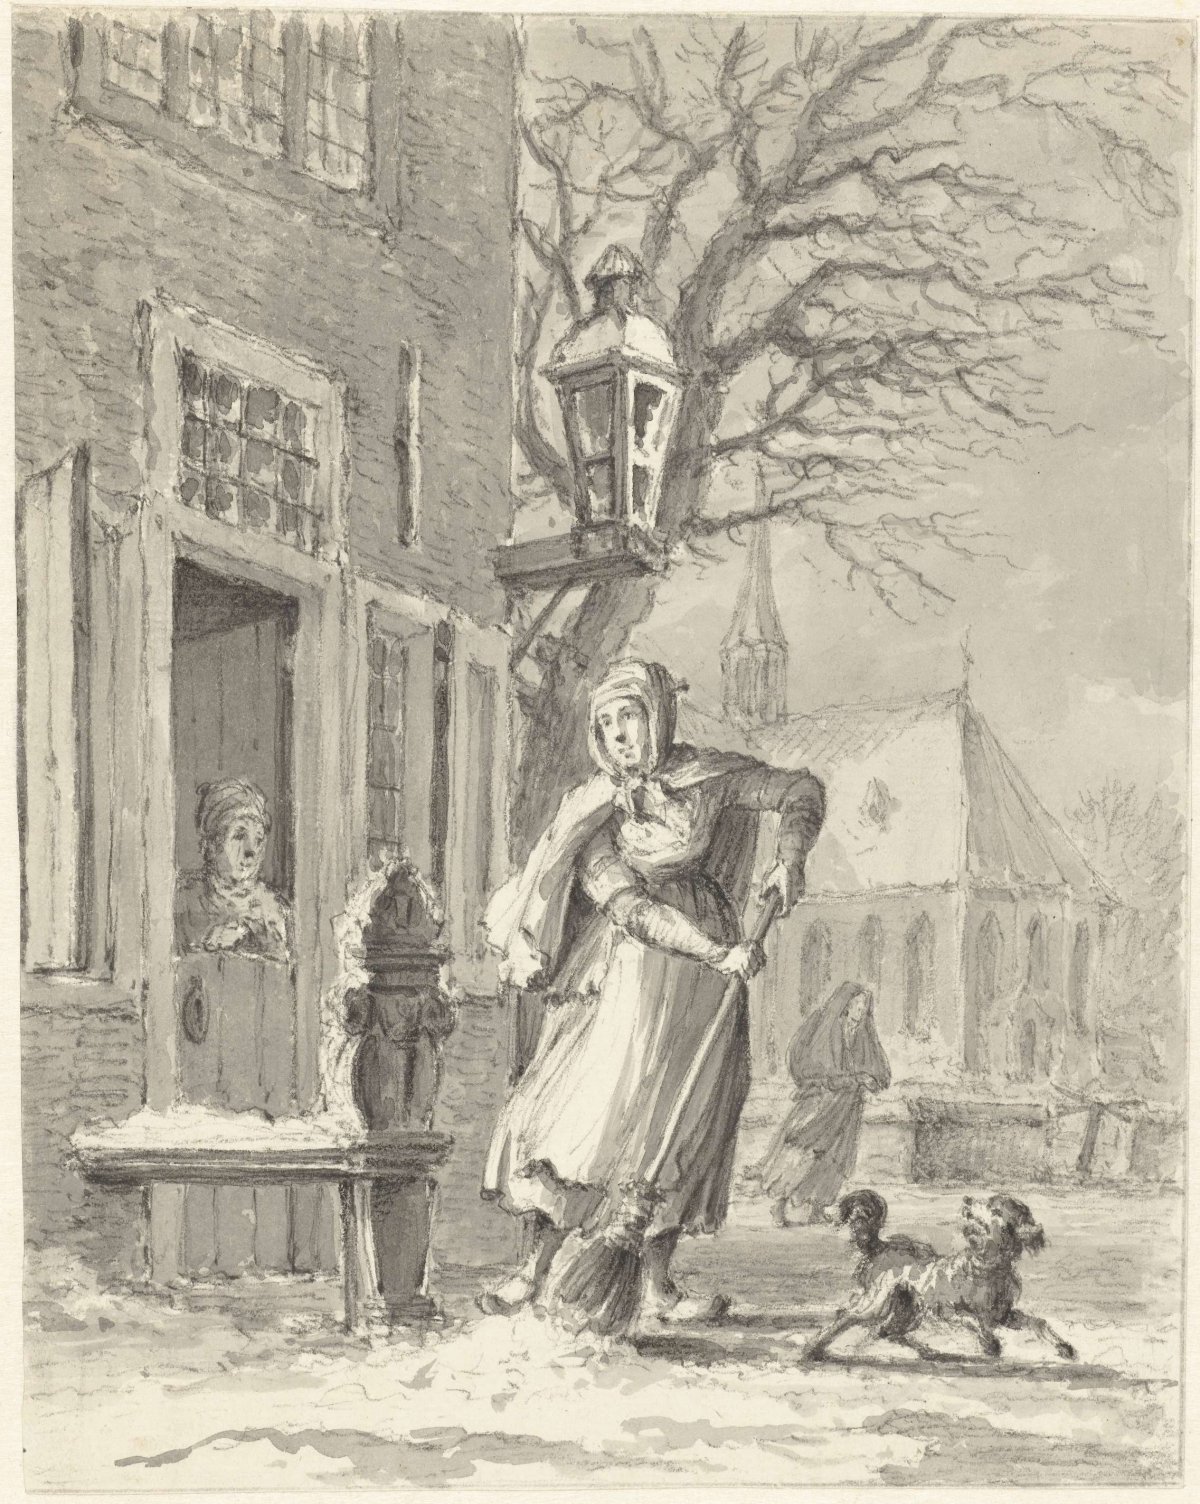 A maid clears snow in front of a house, Johannes Jelgerhuis, 1780 - 1836